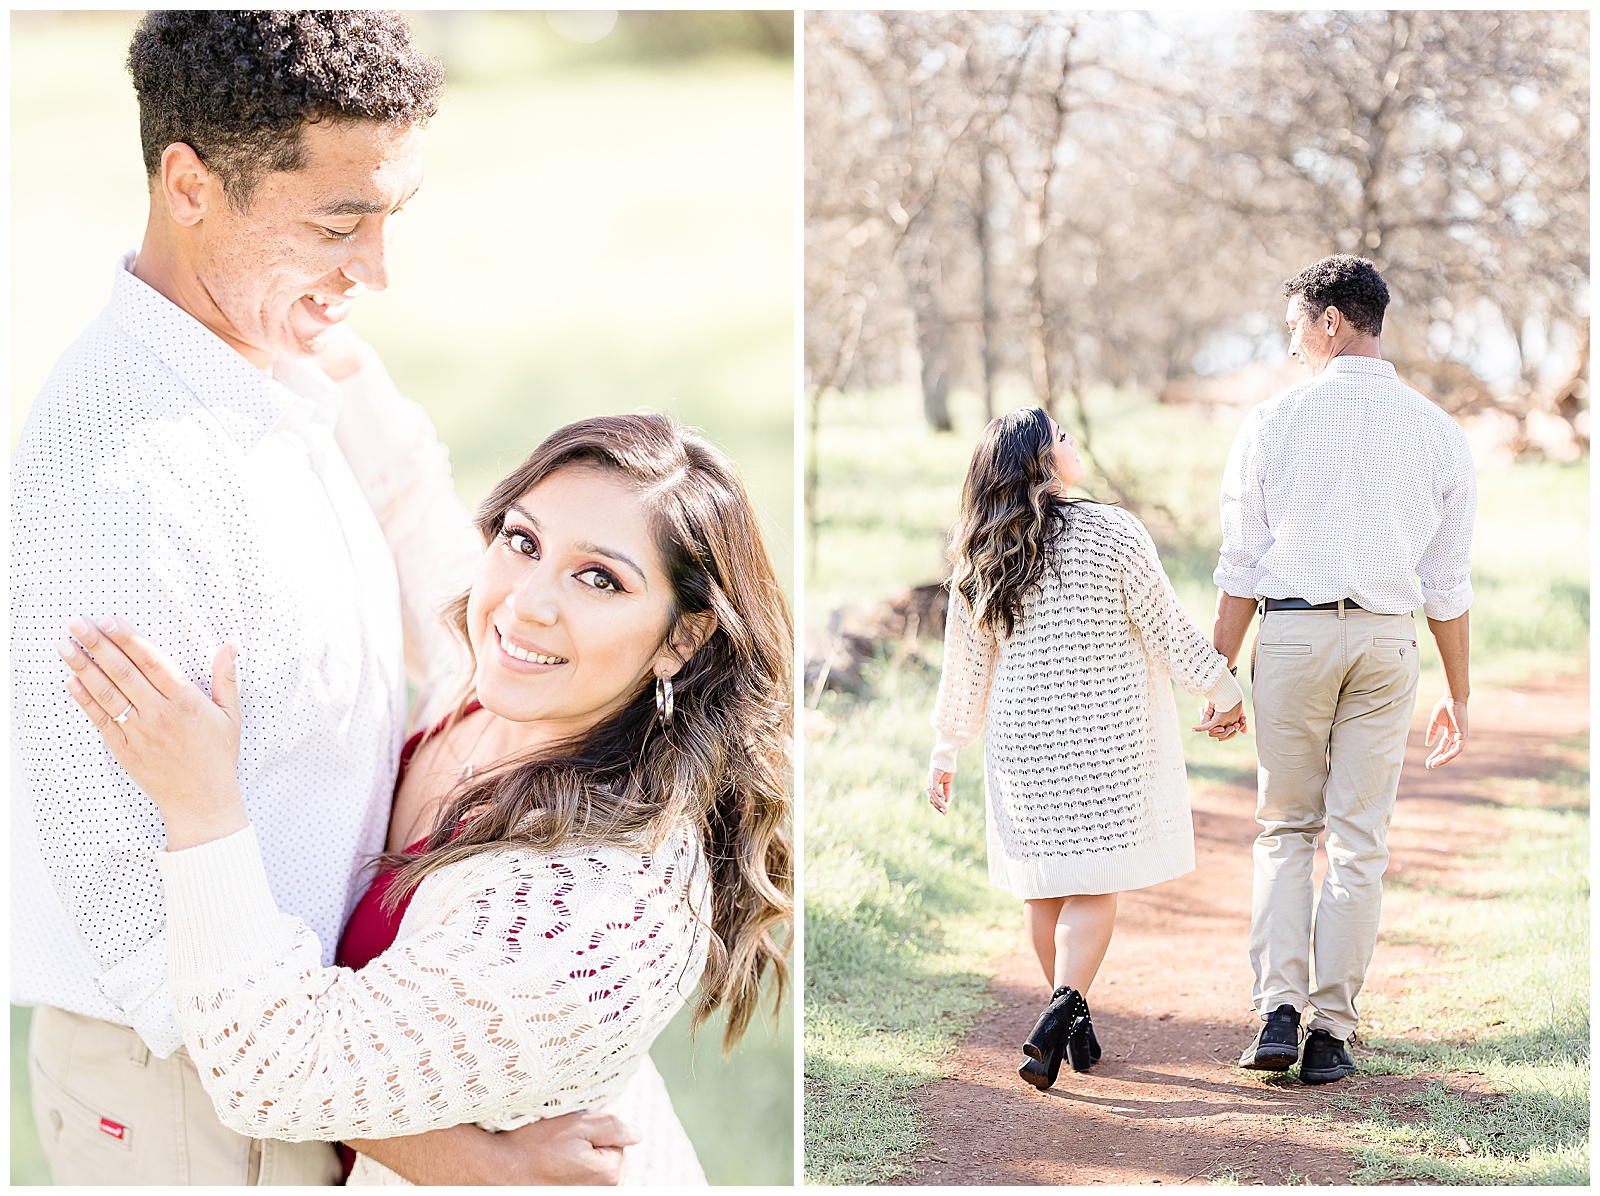 Sunset Engagement Session in Upper Park in Chico, CA